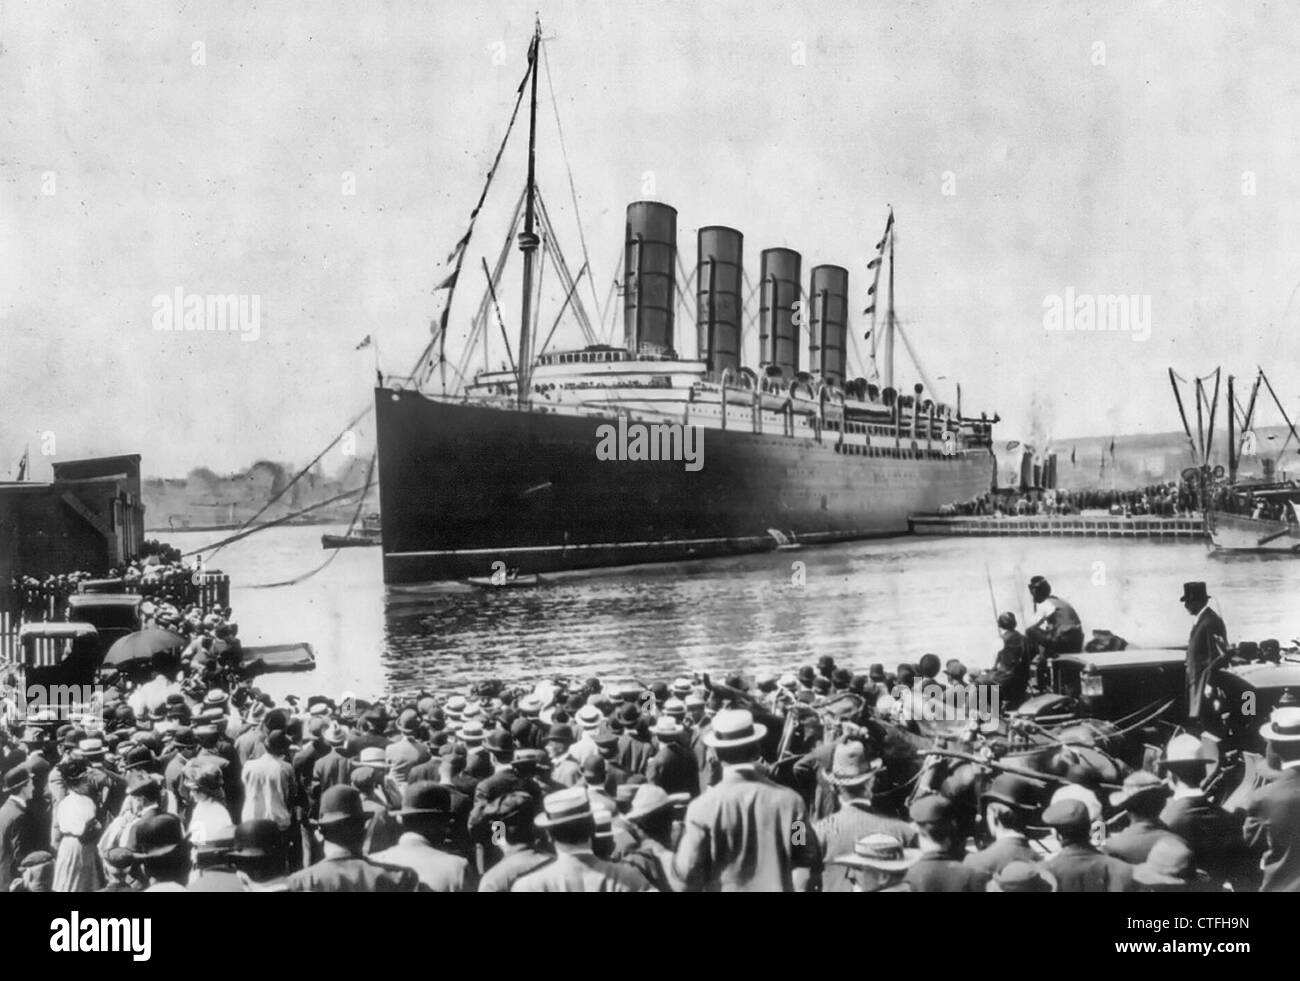 LUSITANIA, New York City: warping into dock, NYC, 13 September 1907, crowd in foreground Stock Photo